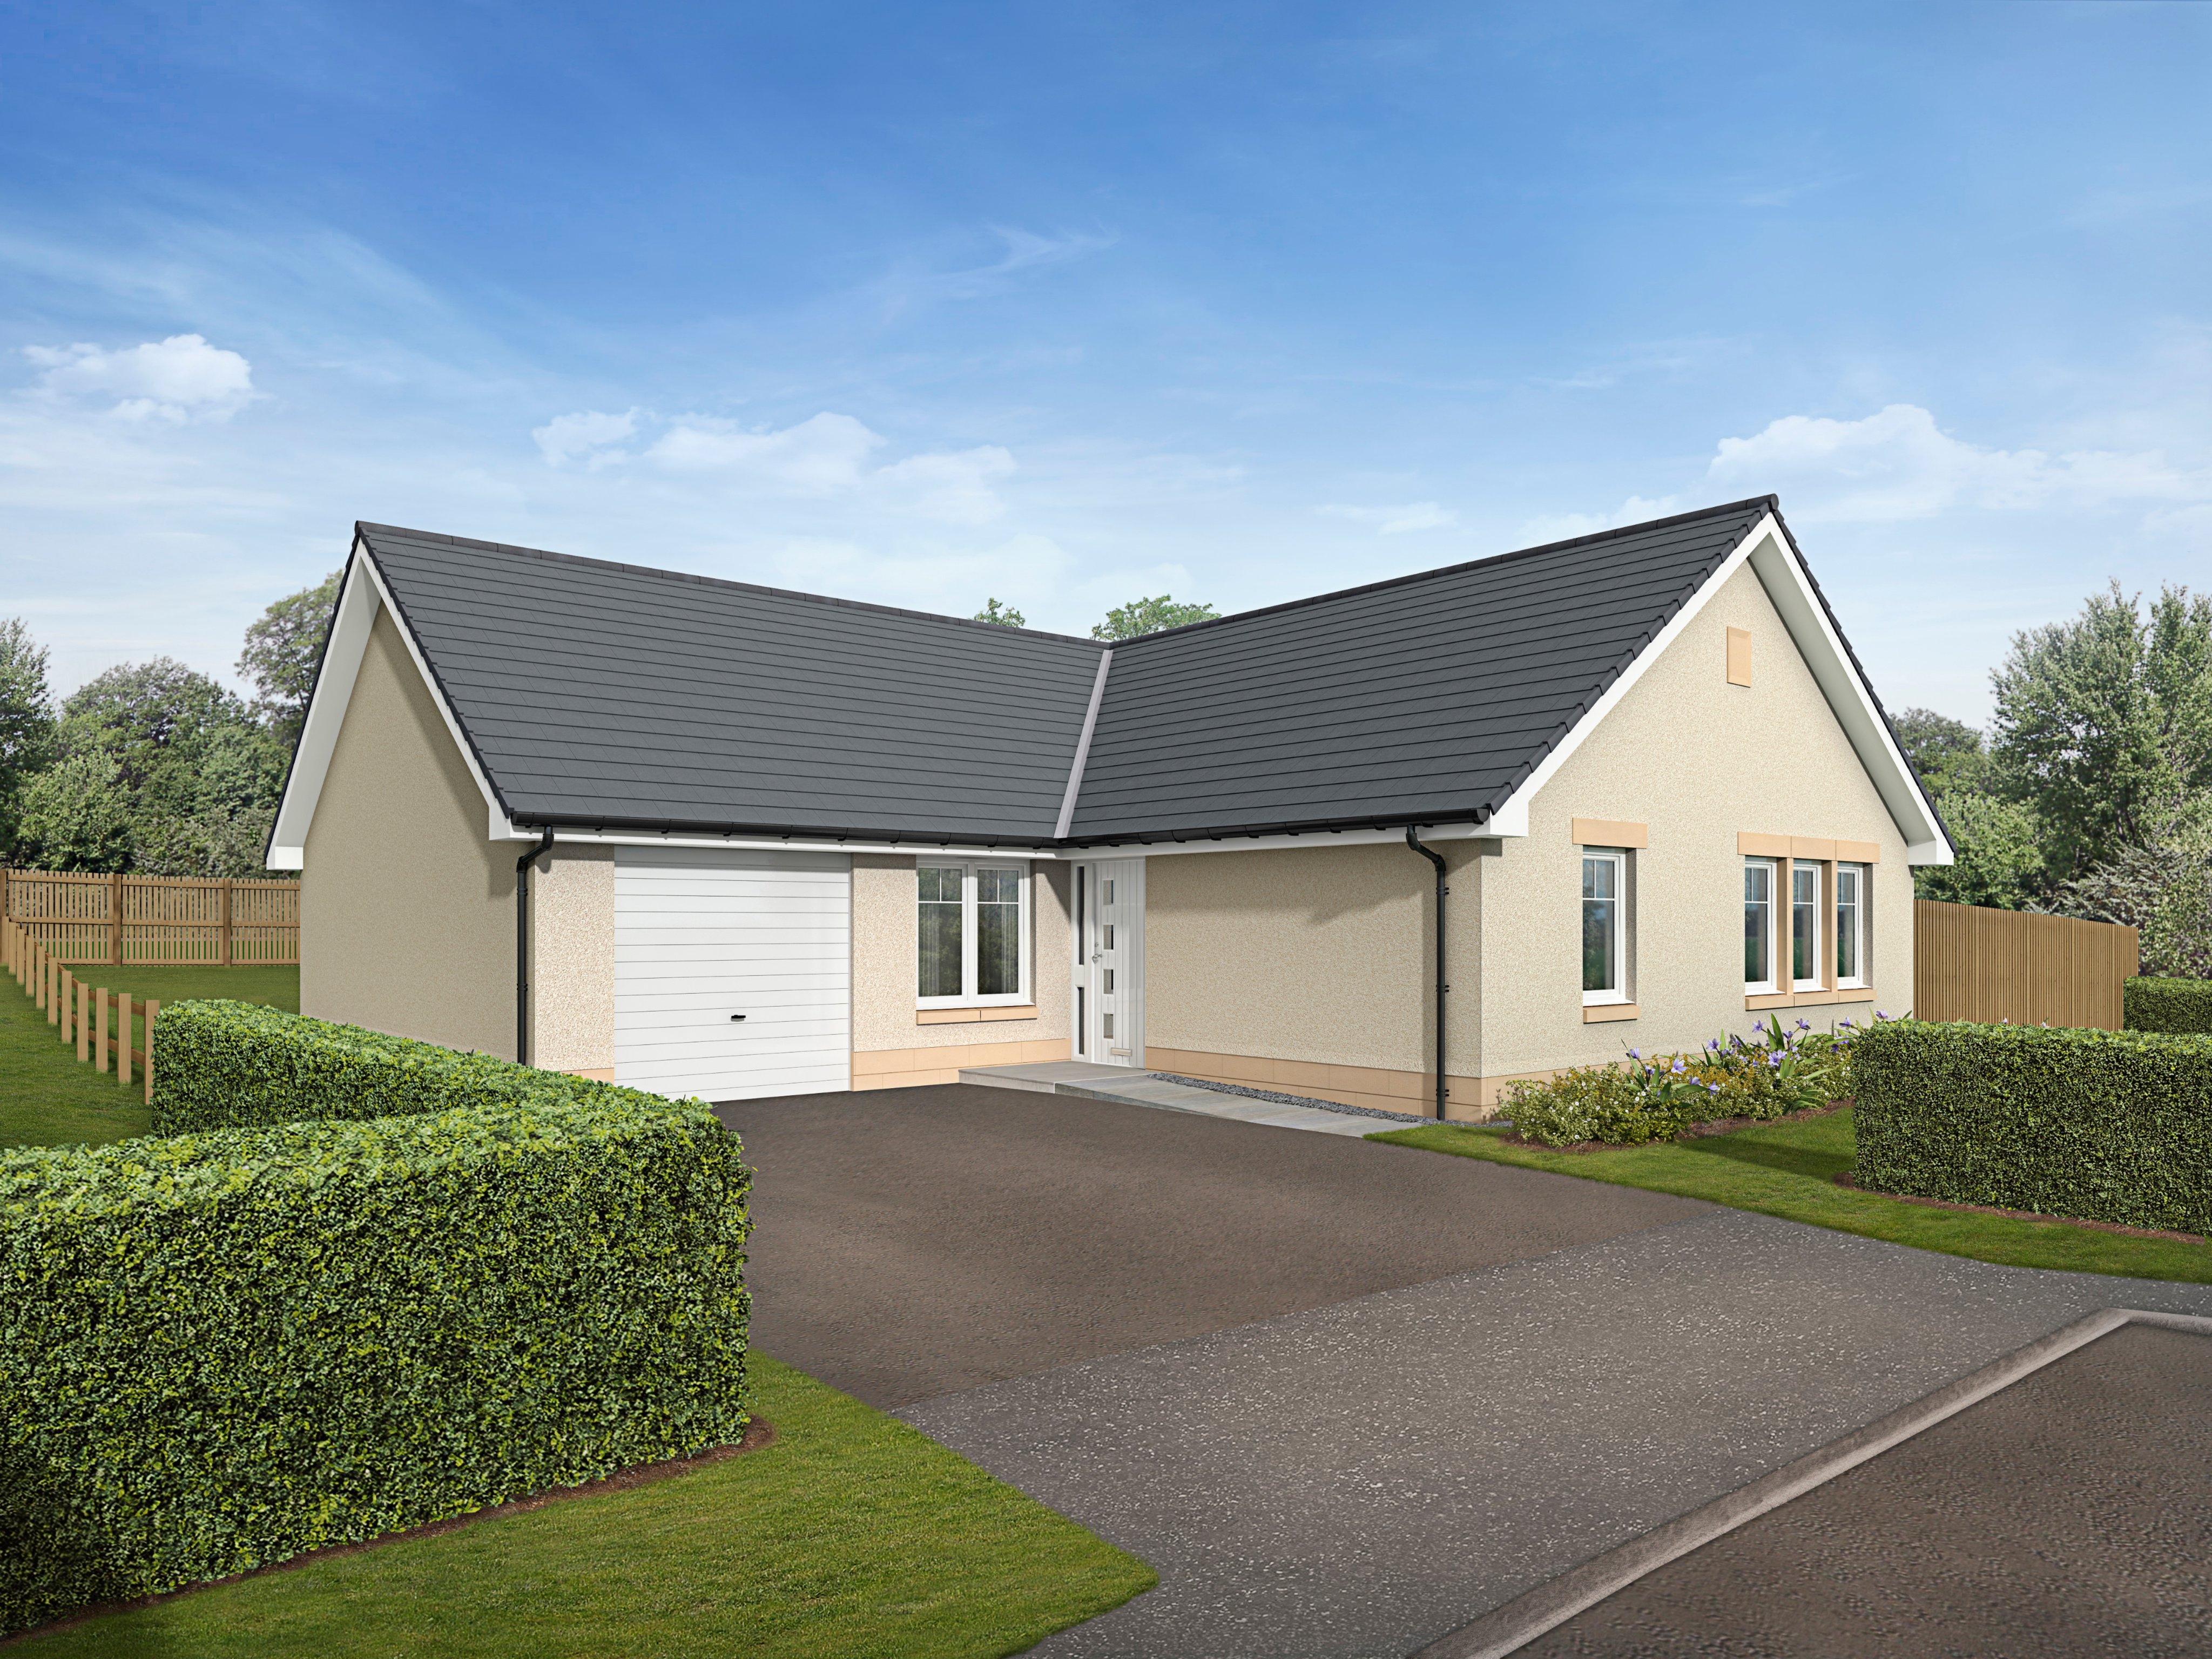 An artist impression of one of the homes proposed for the Forres development.